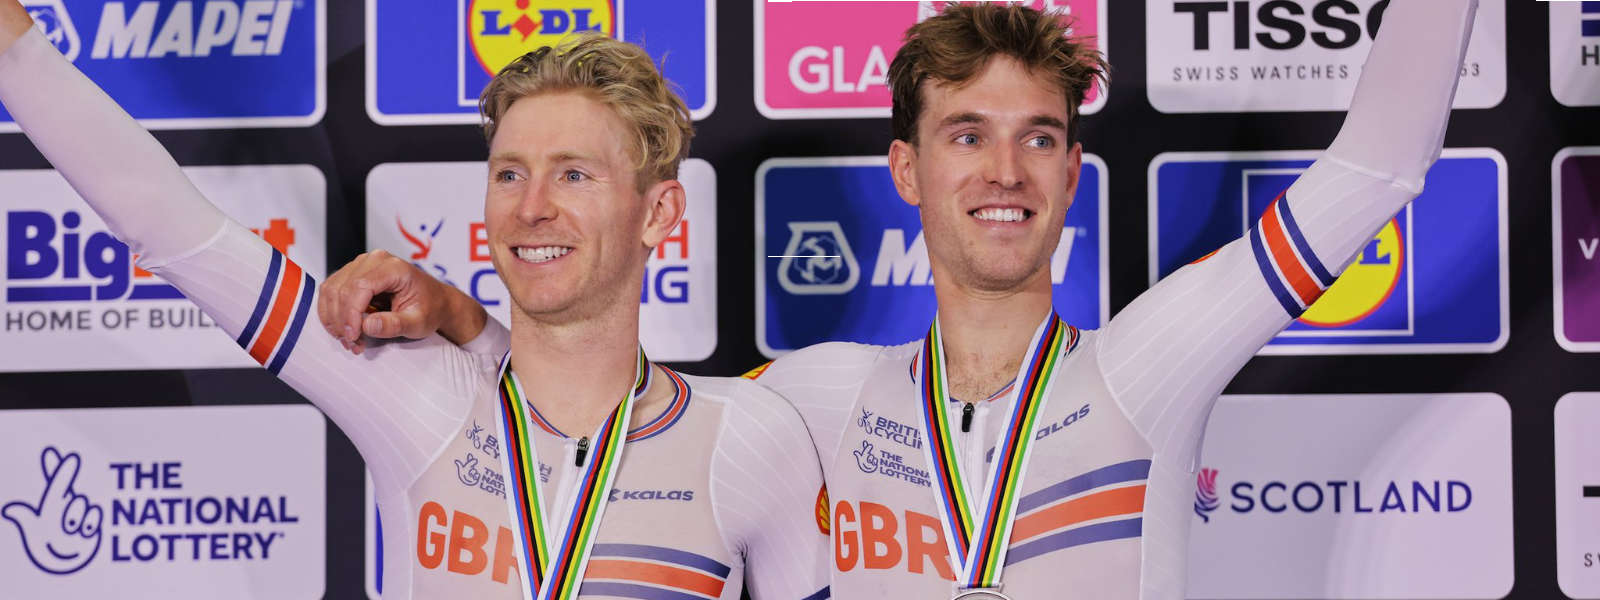 Mark Stewart and Oliver Wood with silver medals around their necks.